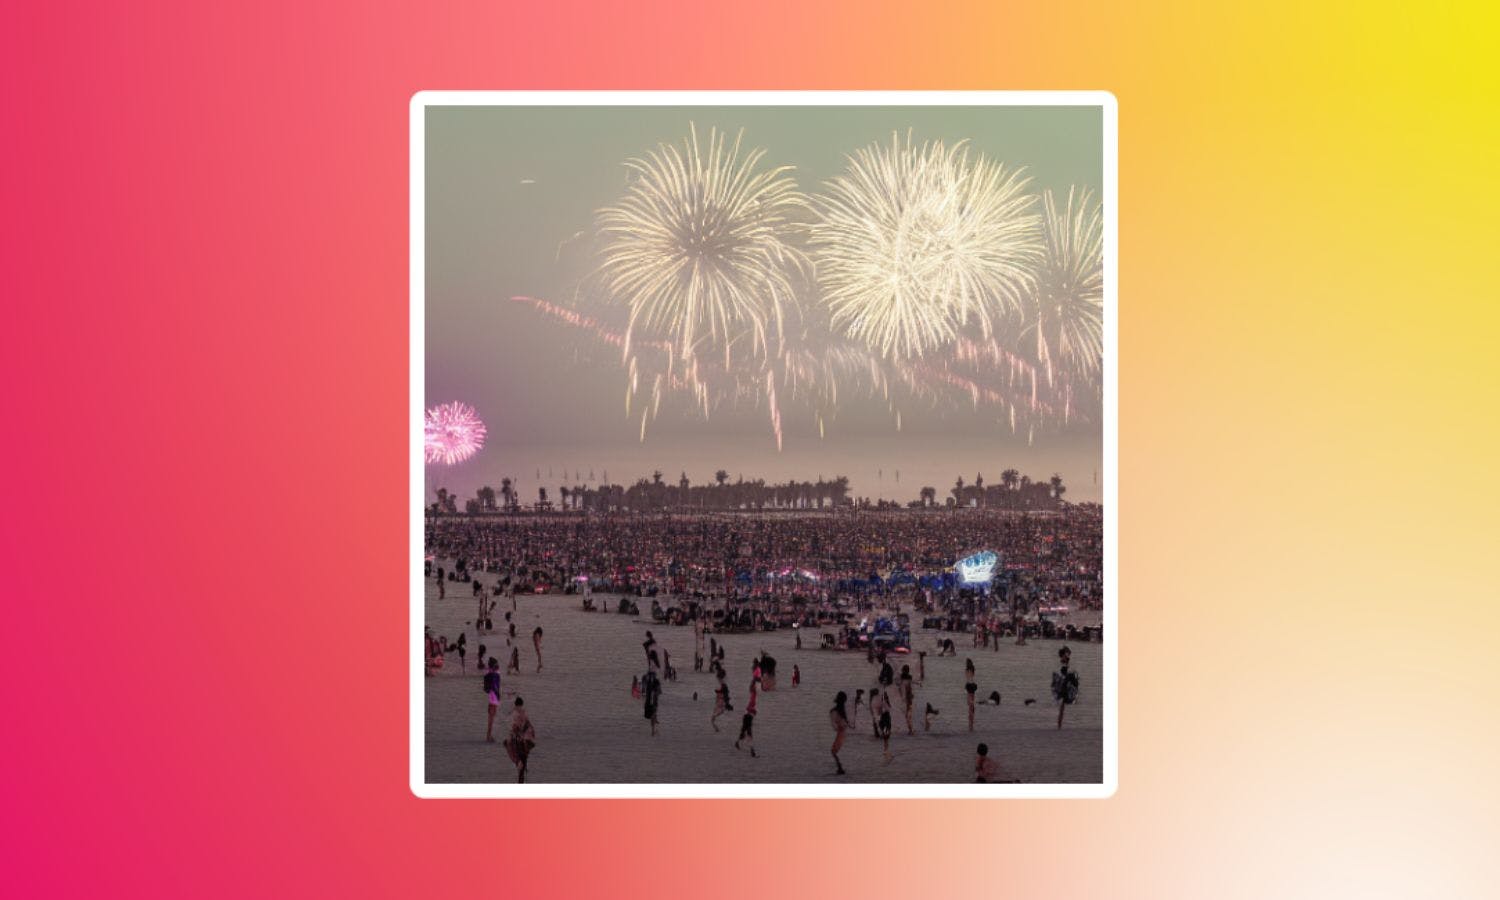 A futuristic photograph of Venice Beach during a fireworks show on New Year’s Eve in the year 2099